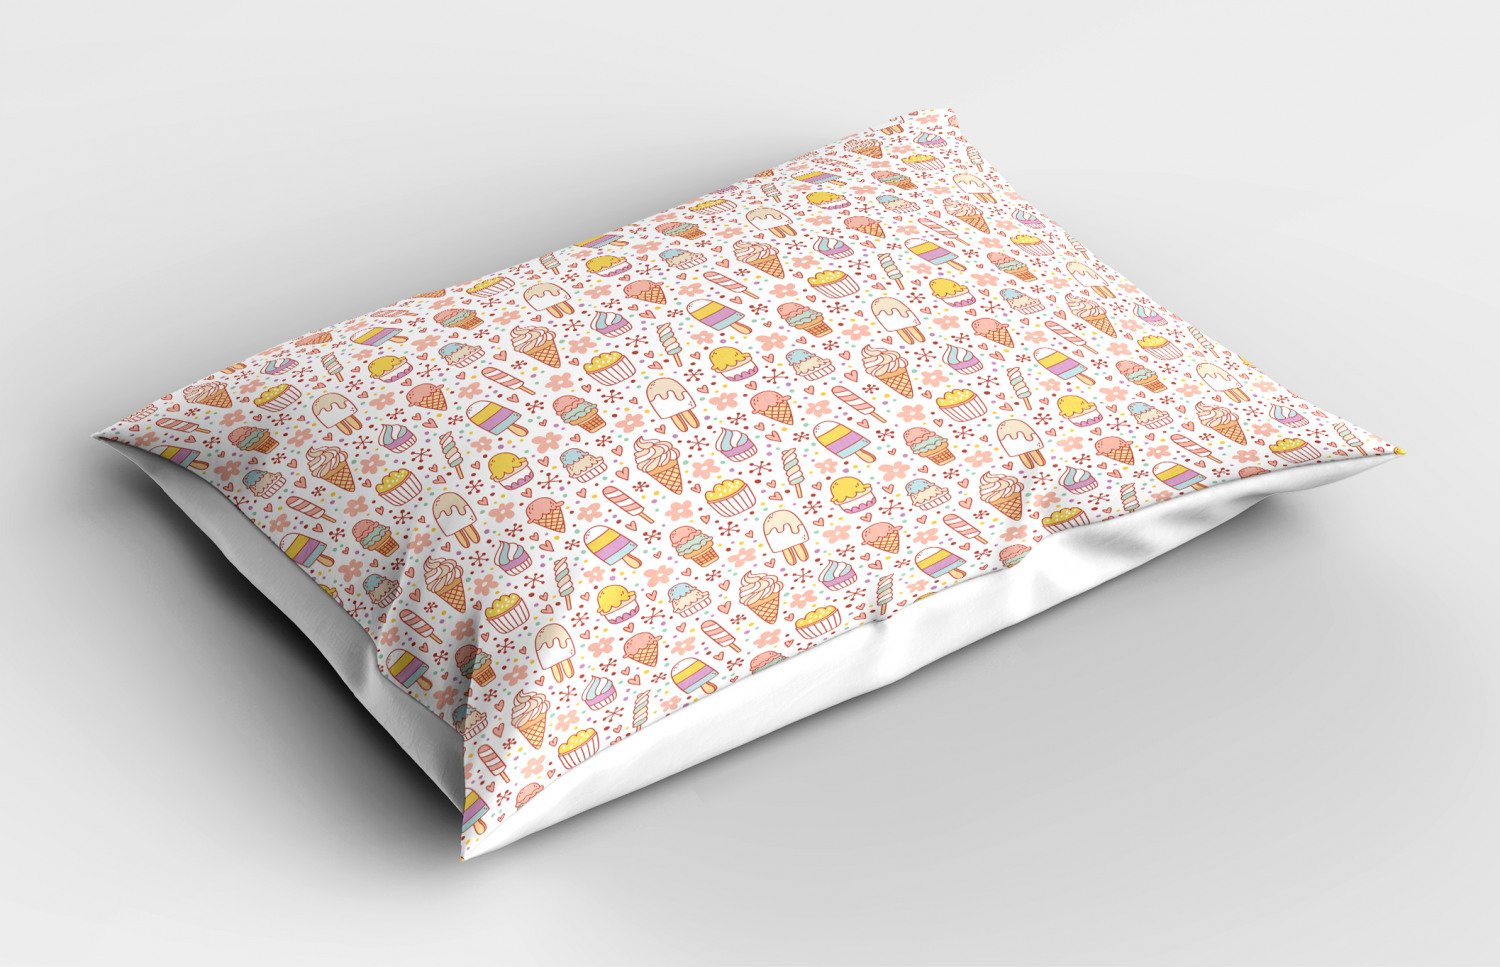 Details about   Ice Cream Pillow Sham Decorative Pillowcase 3 Sizes for Bedroom Decor 